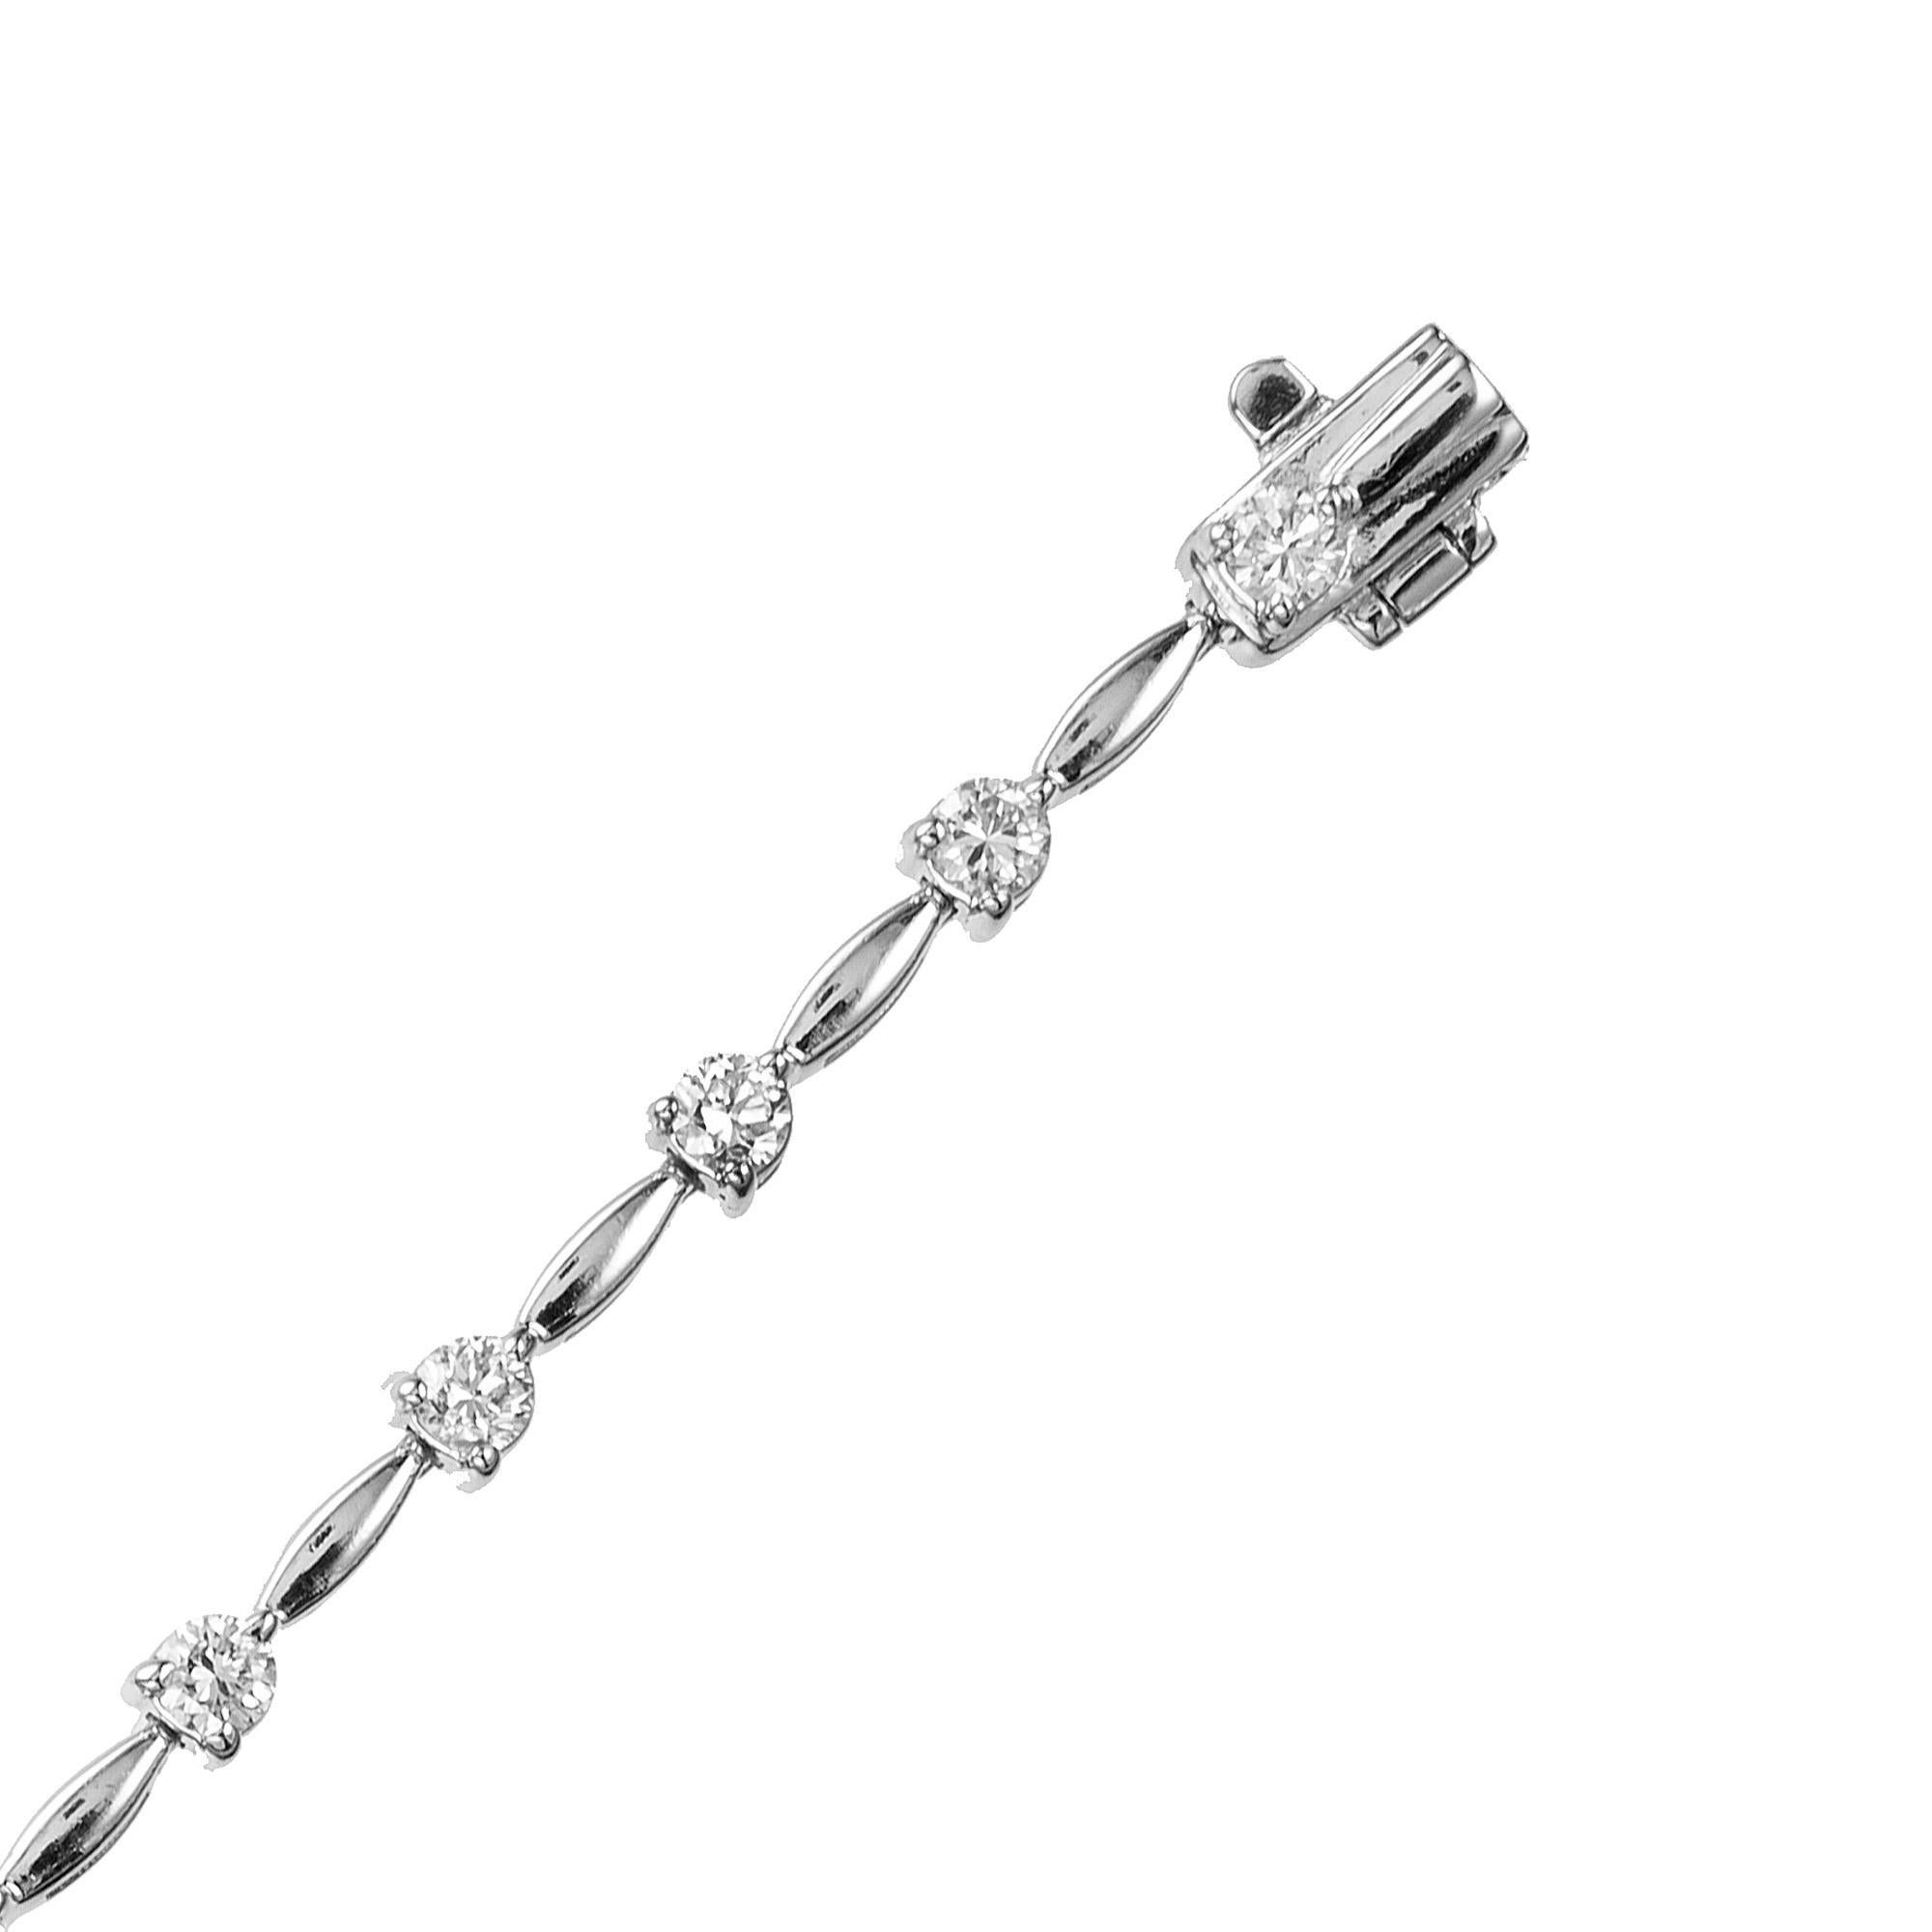 This diamond link tennis bracelet is adorned with 20 round brilliant cut diamonds totaling 1.40cts. Each diamond is separated by 14k white gold marquise style spacers. The bracelet measures at 6.75 inches and the clasp is secure with an under catch.